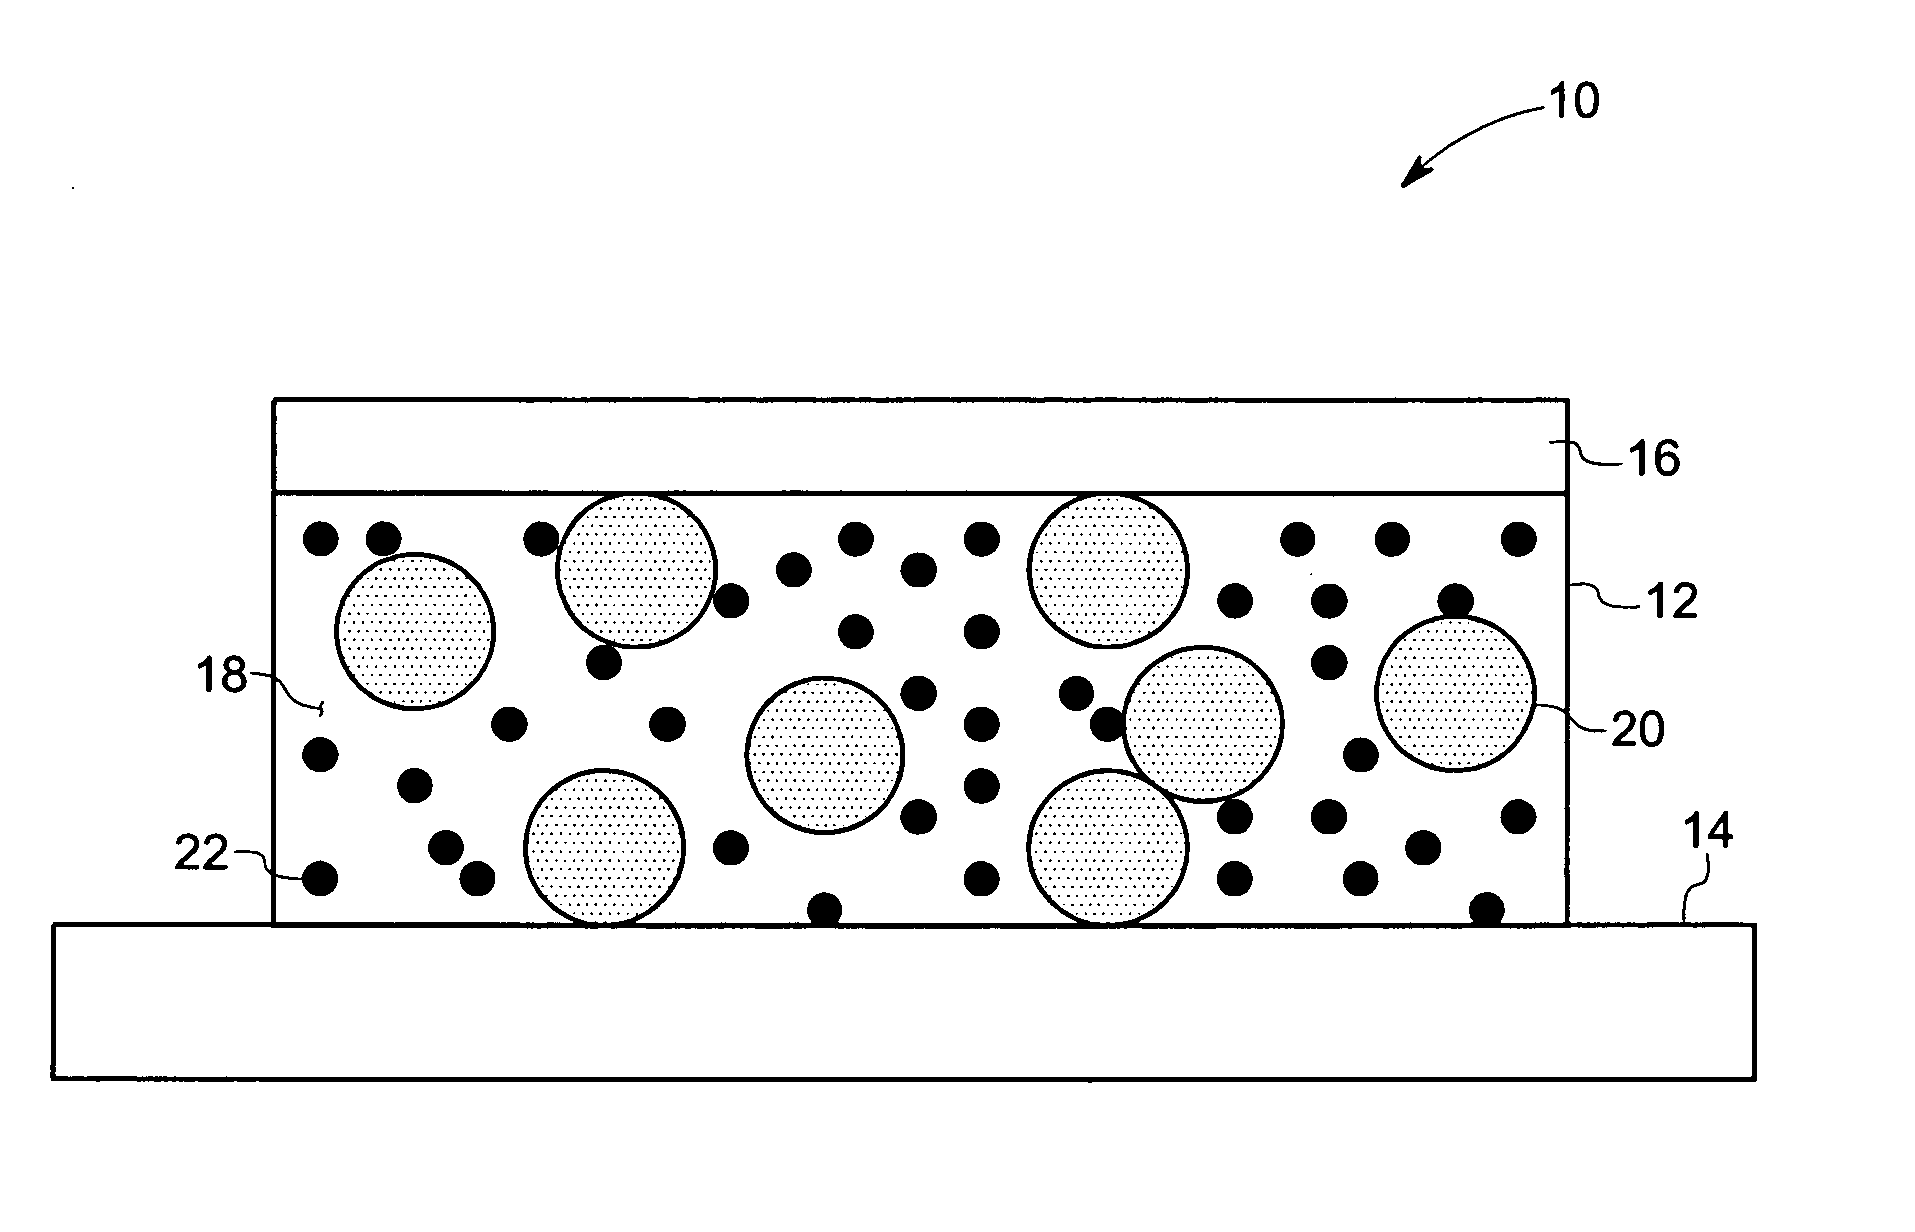 Electrically conductive adhesives